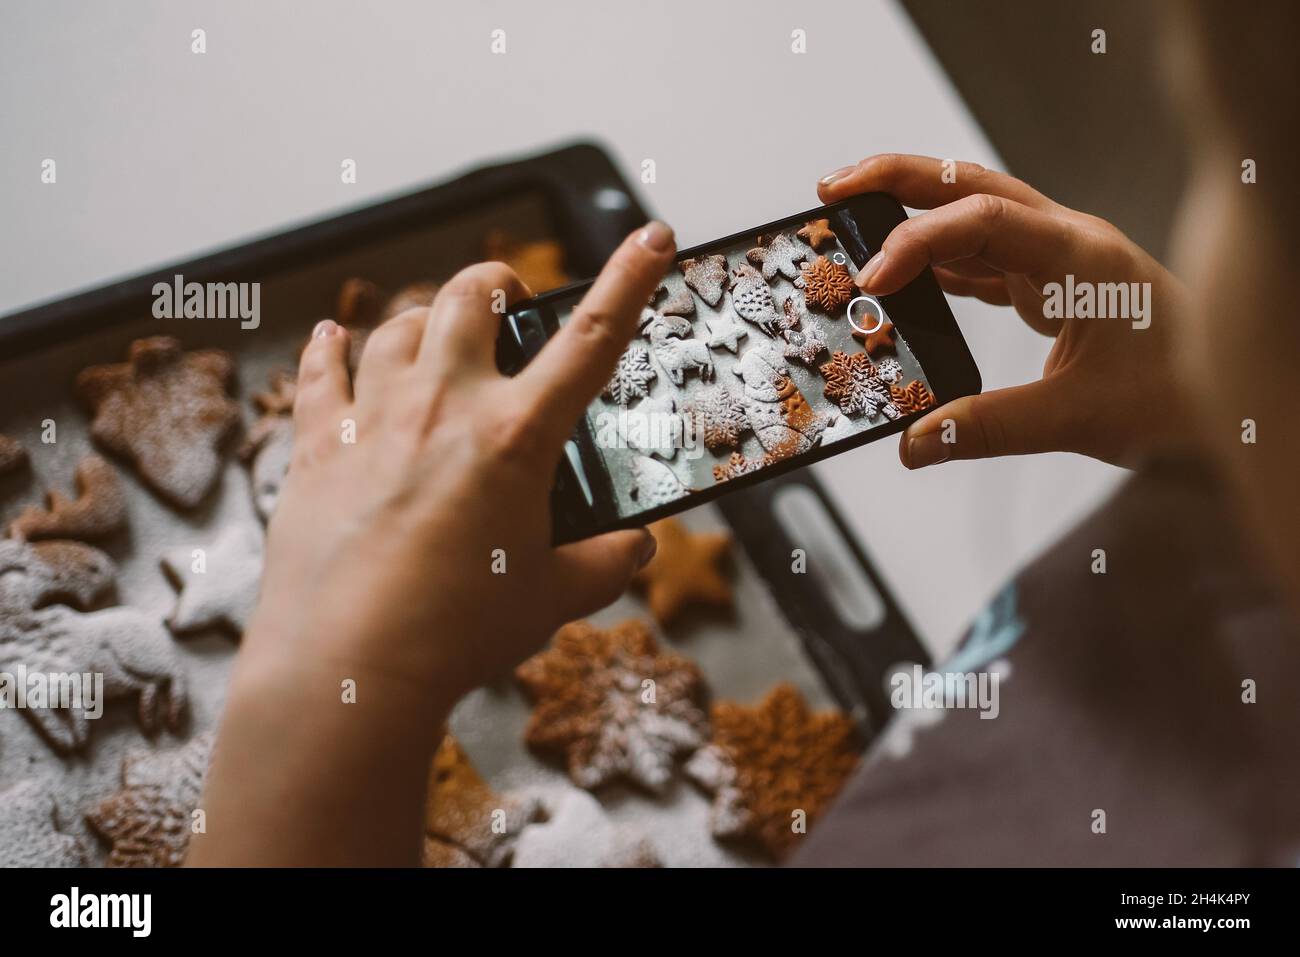 Woman takes photo on smartphone Christmas gingerbread sprinkled with powdered sugar. Stock Photo